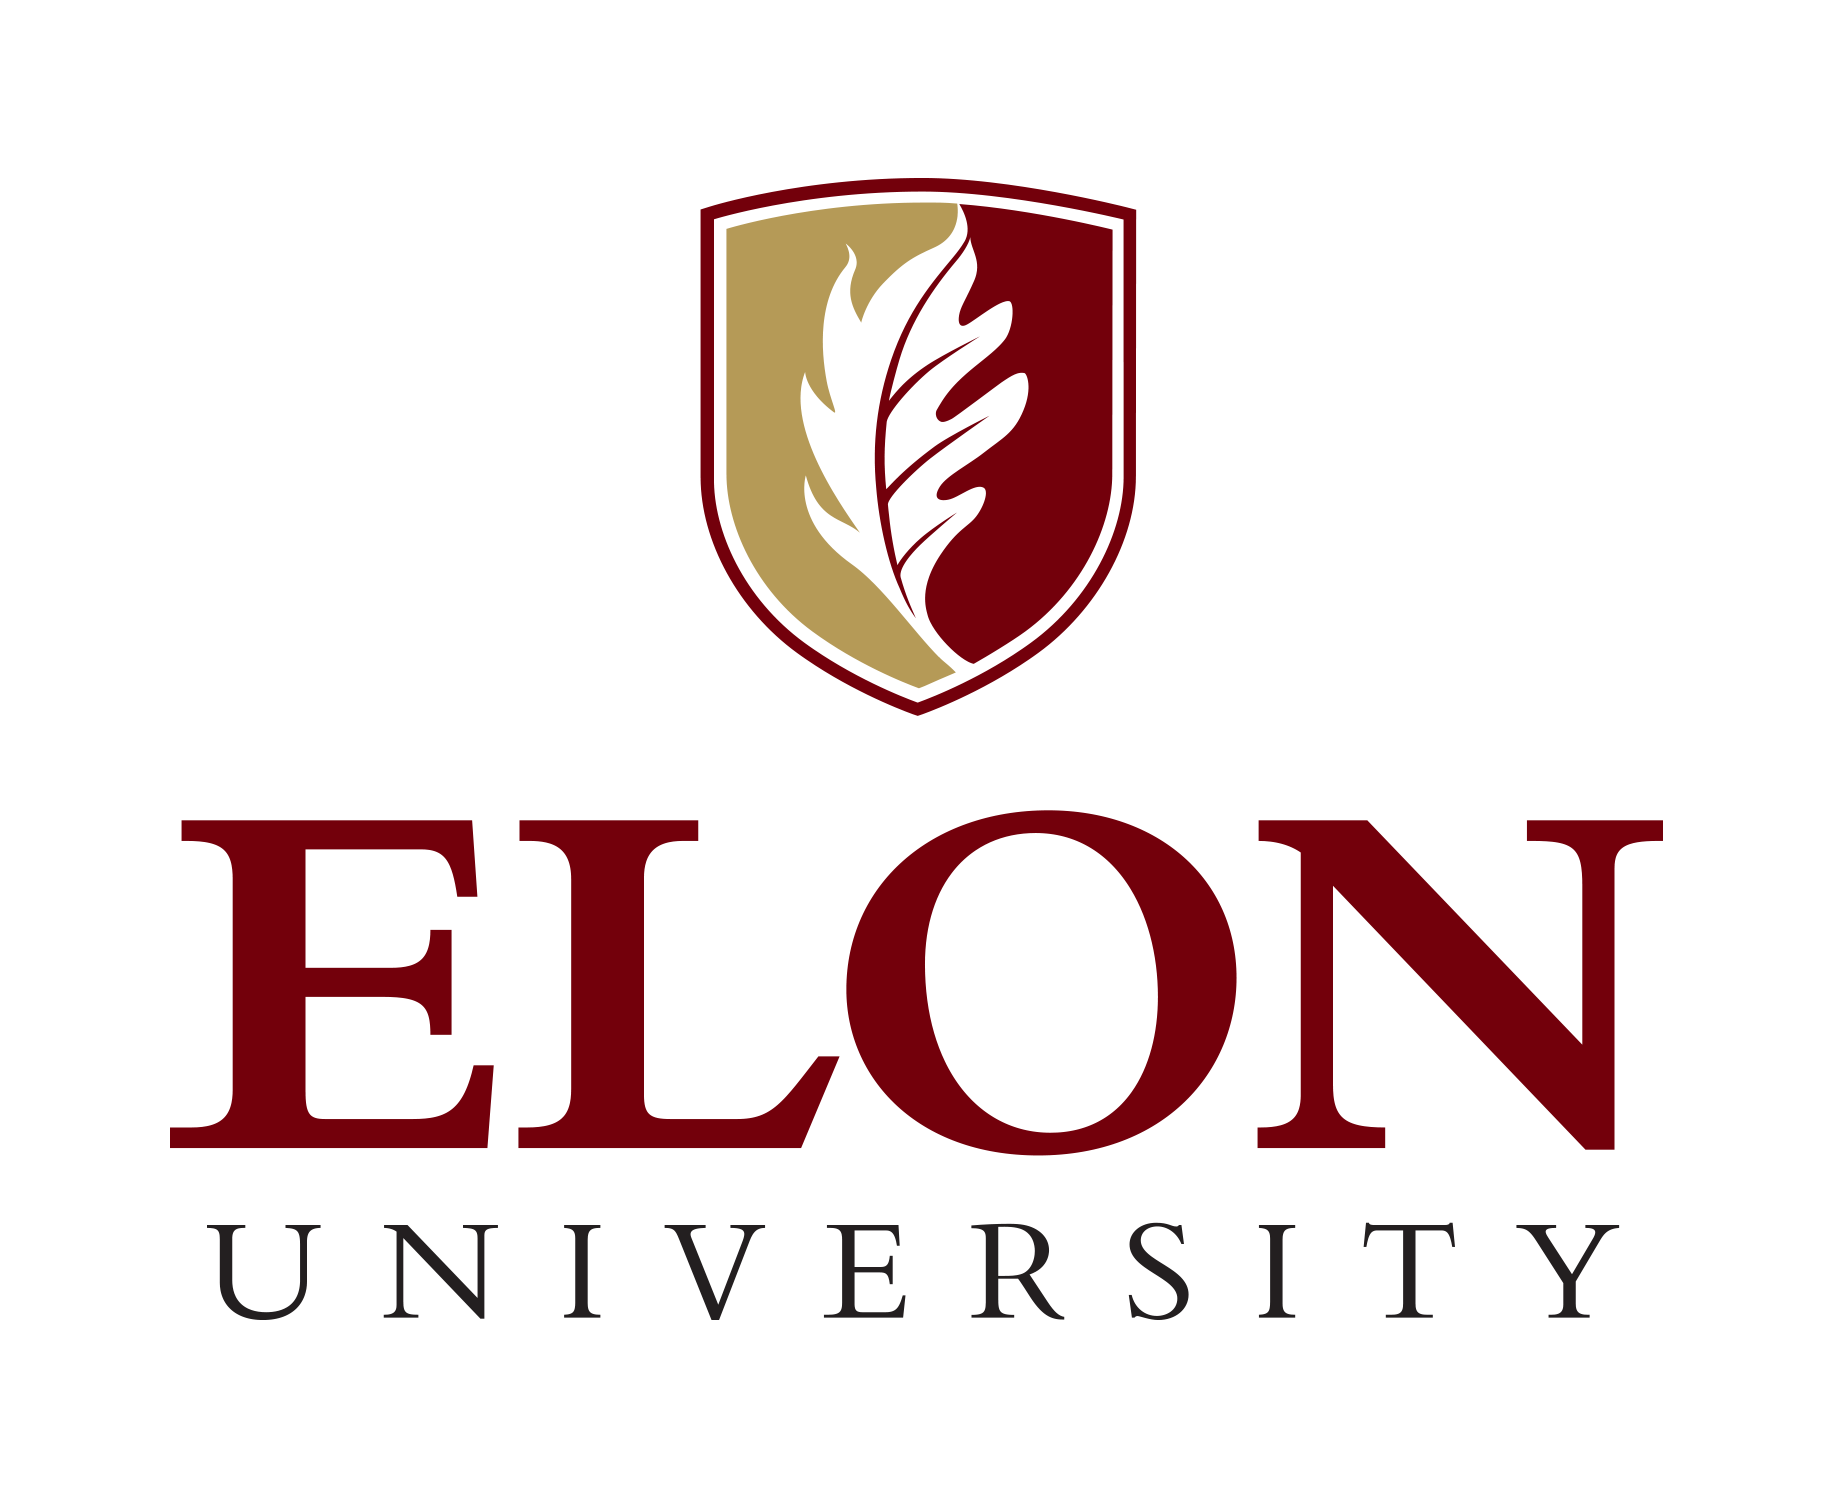 elon-signature-primary-centered-maroon-gold-blk-rgb-300dpi.png